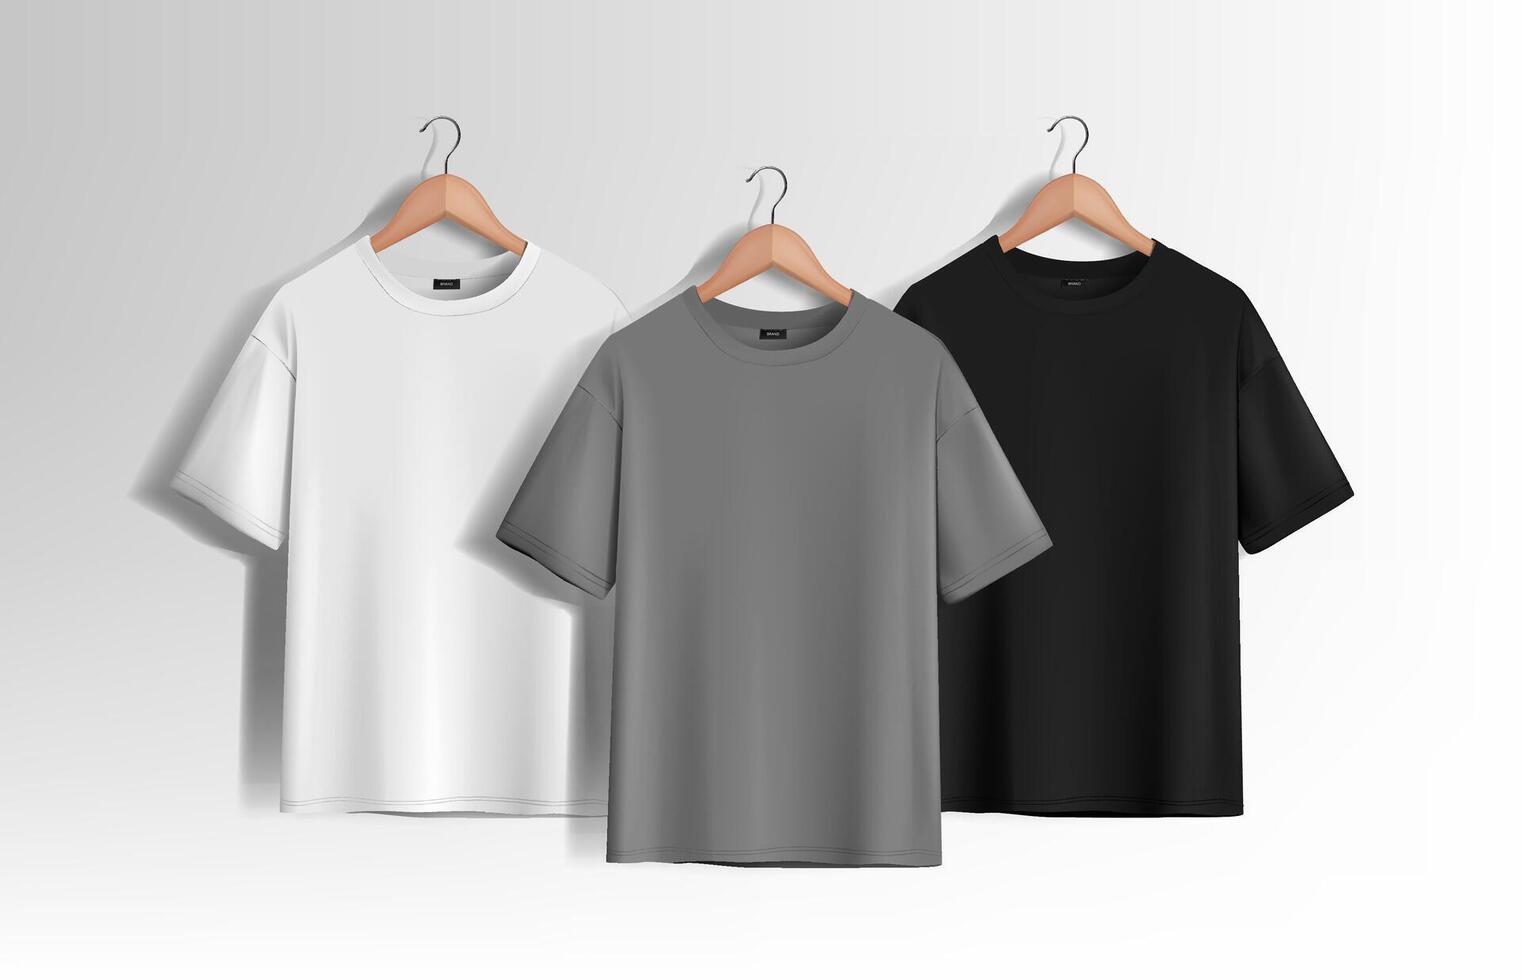 Men's black white and gray short sleeve t-shirt mockup. Front view. template. vector